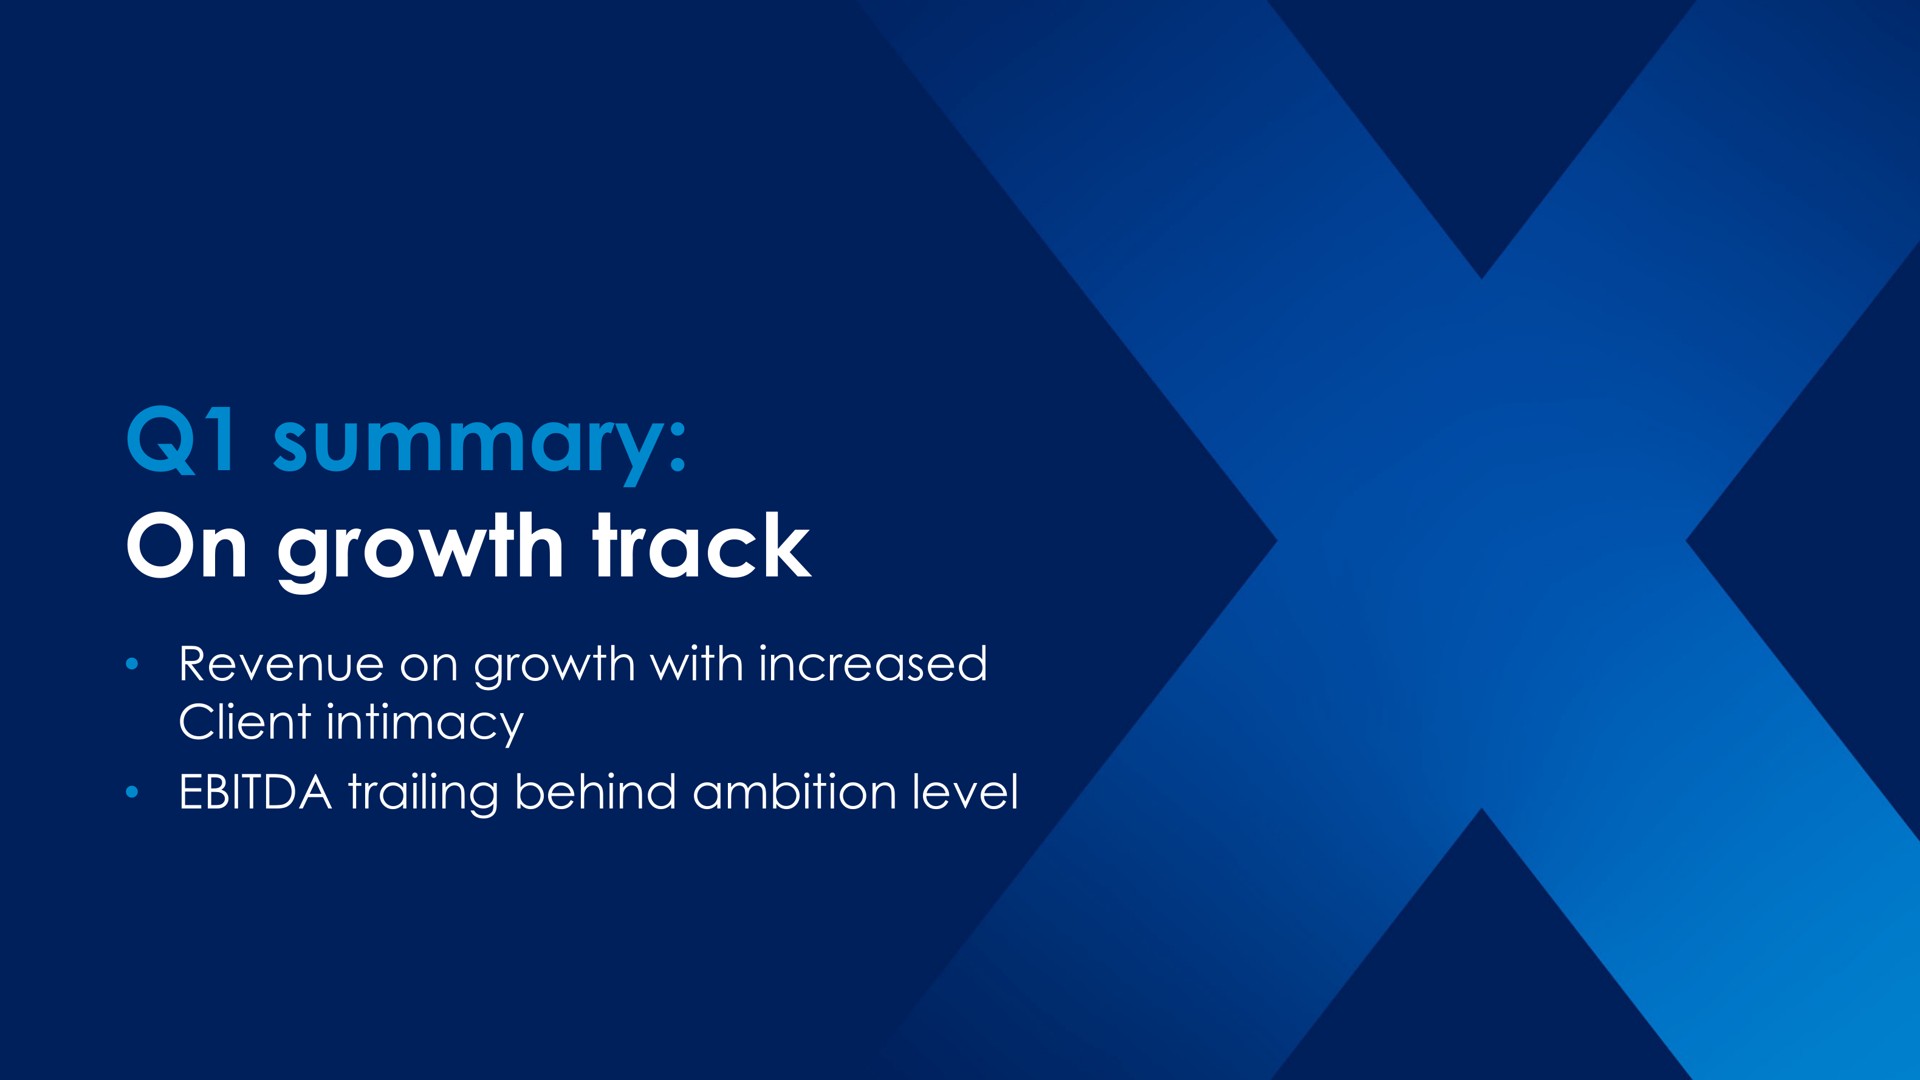 summary on growth track revenue with increased client intimacy trailing behind ambition level | Nixu